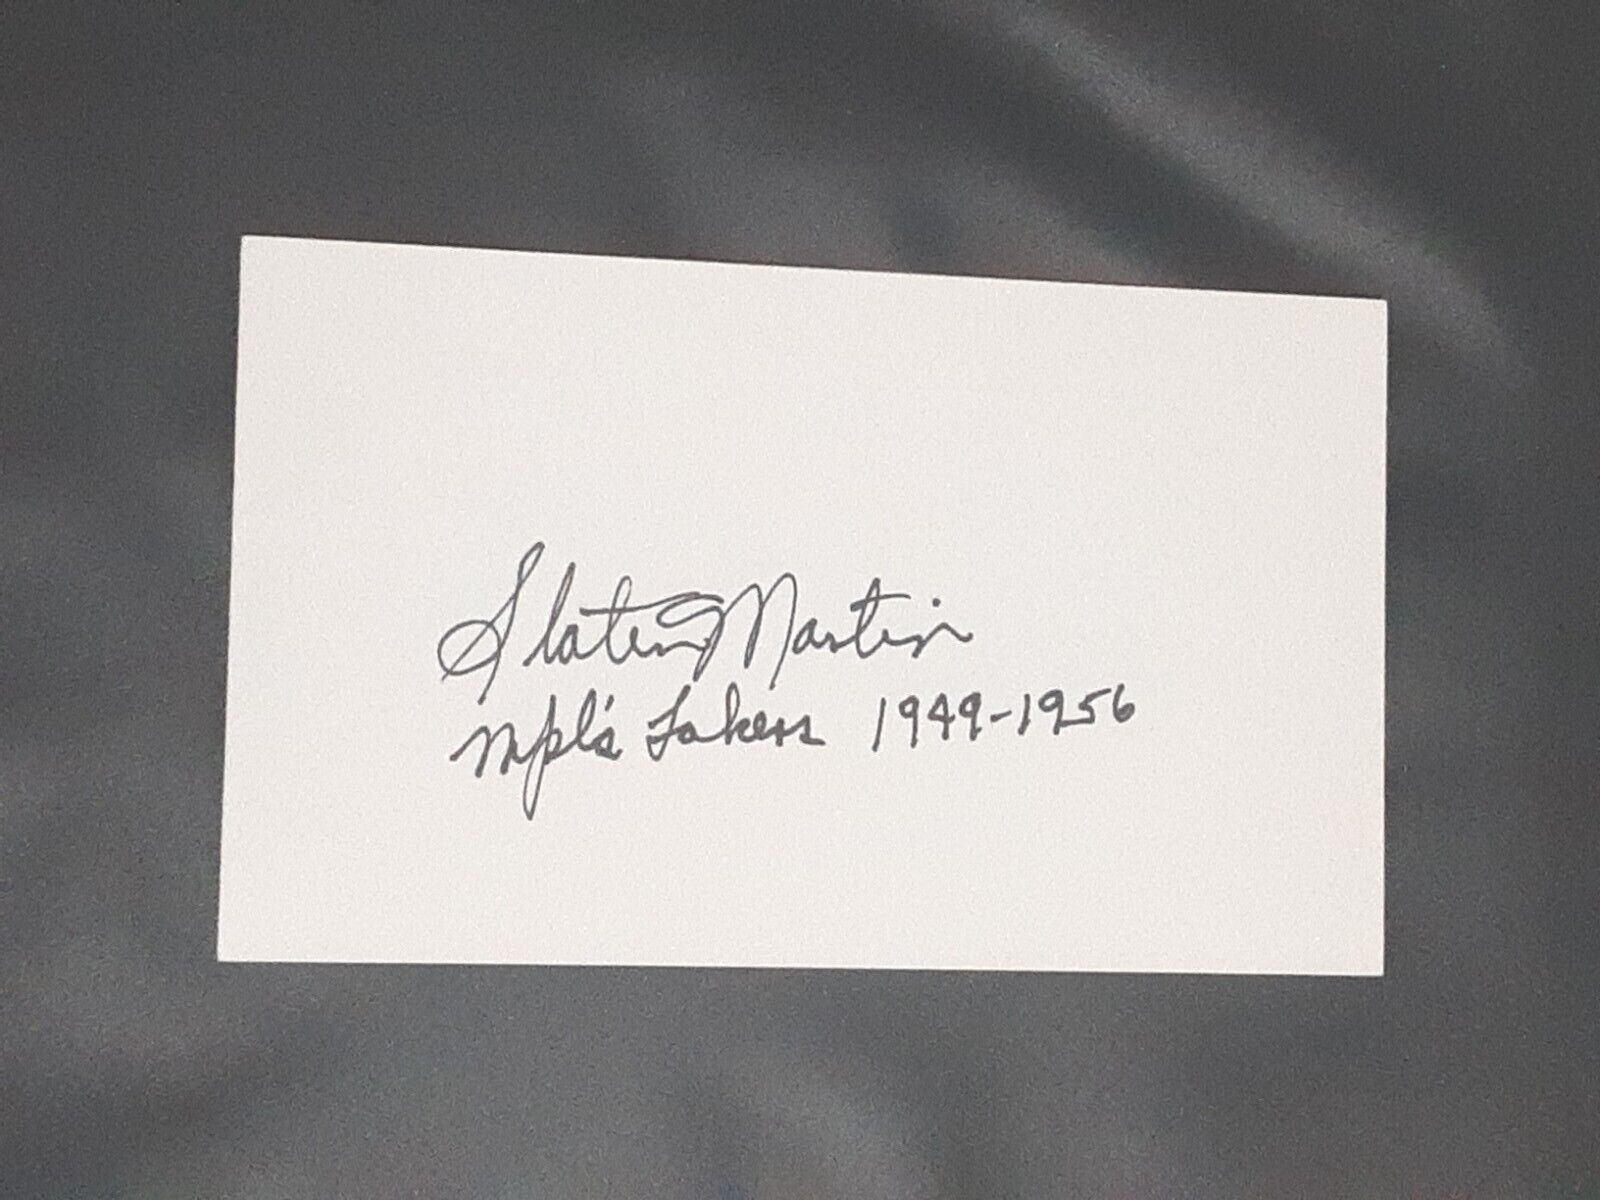 Slater Martin Added "mpls Lakers 1959-1956" Signed Autographed Index Card 3x5